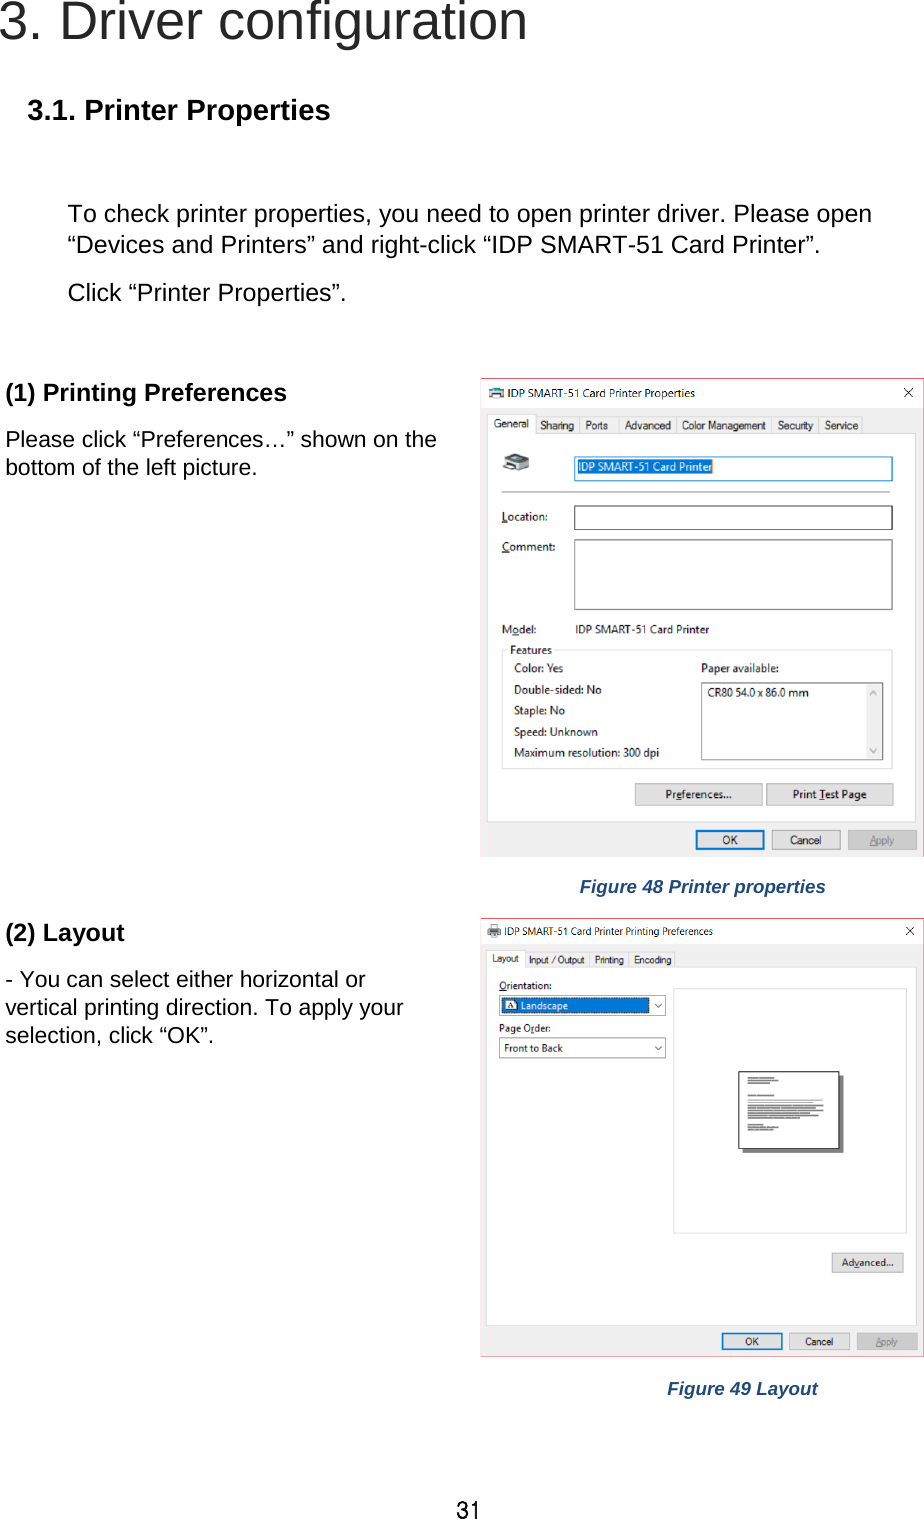 31 3. Driver configuration  3.1. Printer Properties  To check printer properties, you need to open printer driver. Please open “Devices and Printers” and right-click “IDP SMART-51 Card Printer”.   Click “Printer Properties”.    (1) Printing Preferences   Please click “Preferences…” shown on the bottom of the left picture.   Figure 48 Printer properties (2) Layout - You can select either horizontal or vertical printing direction. To apply your selection, click “OK”.   Figure 49 Layout 